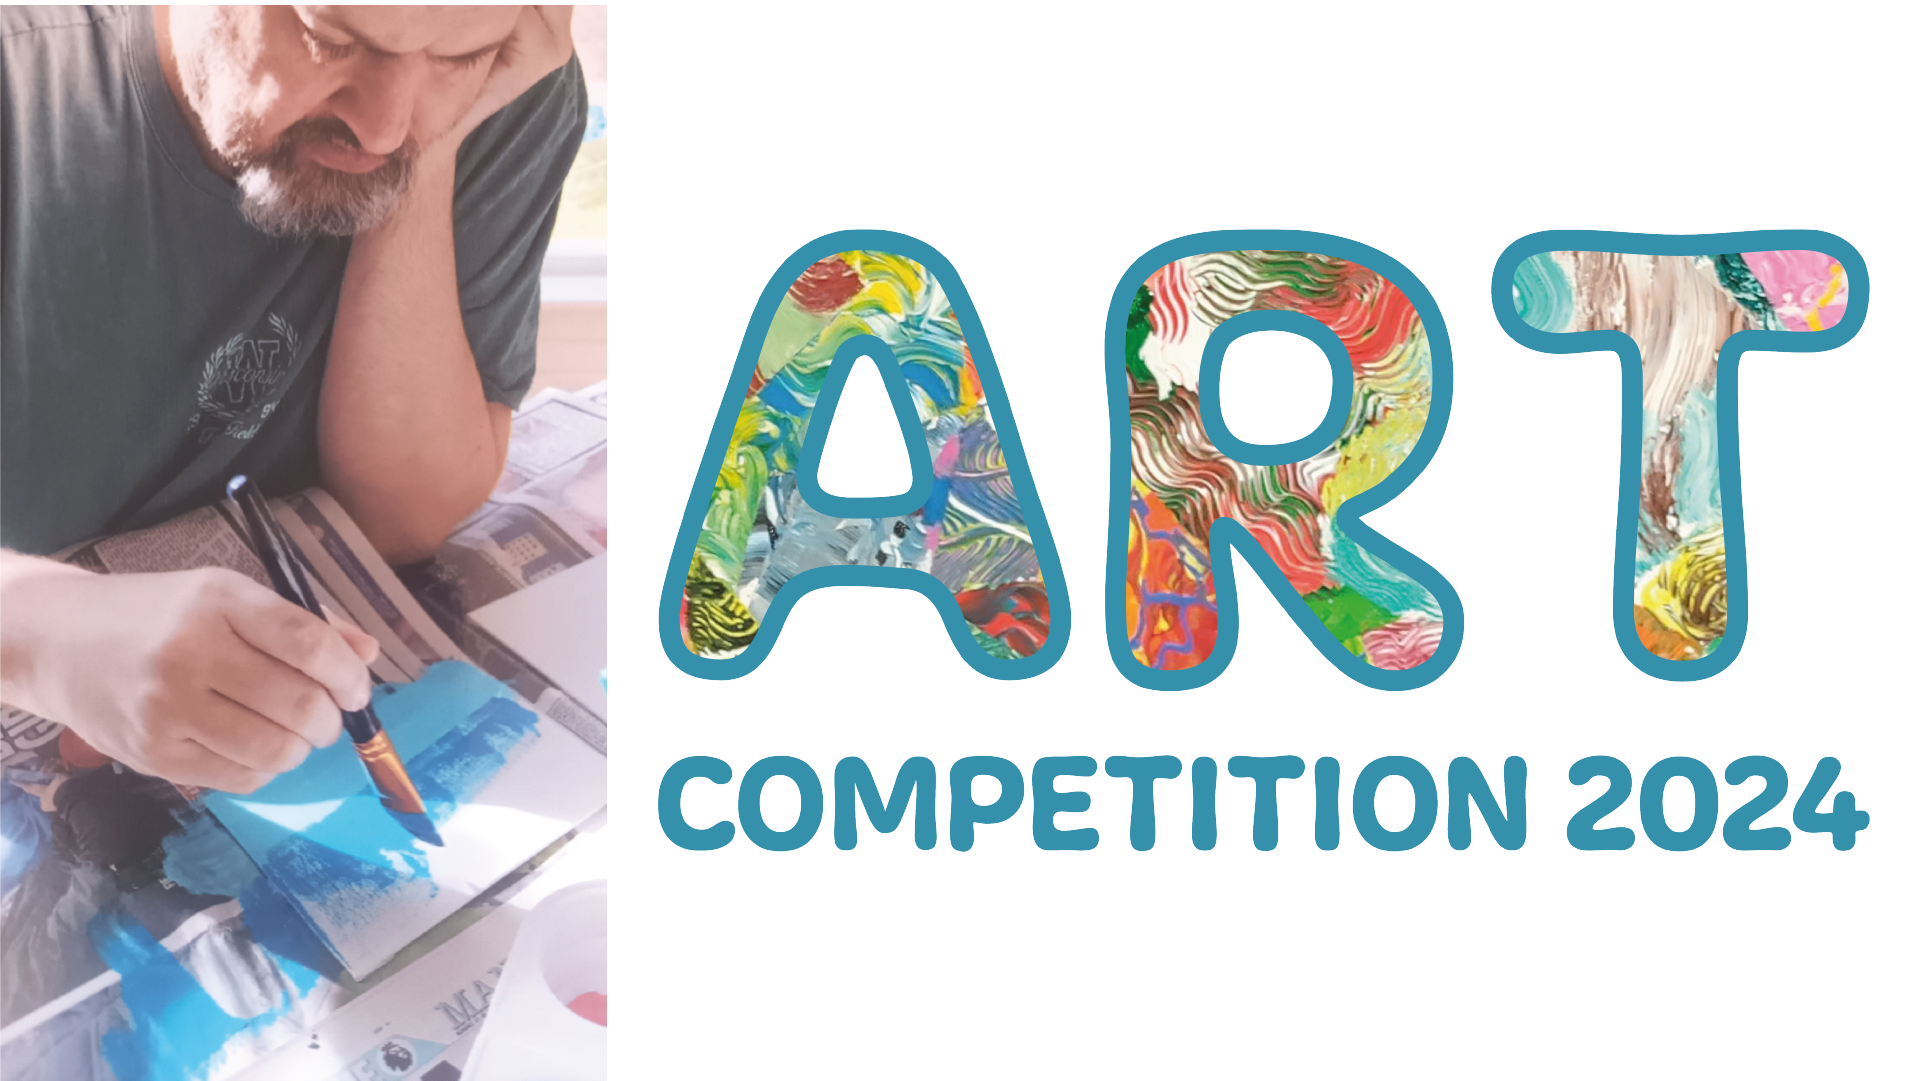 This year’s Art Competition is now open!